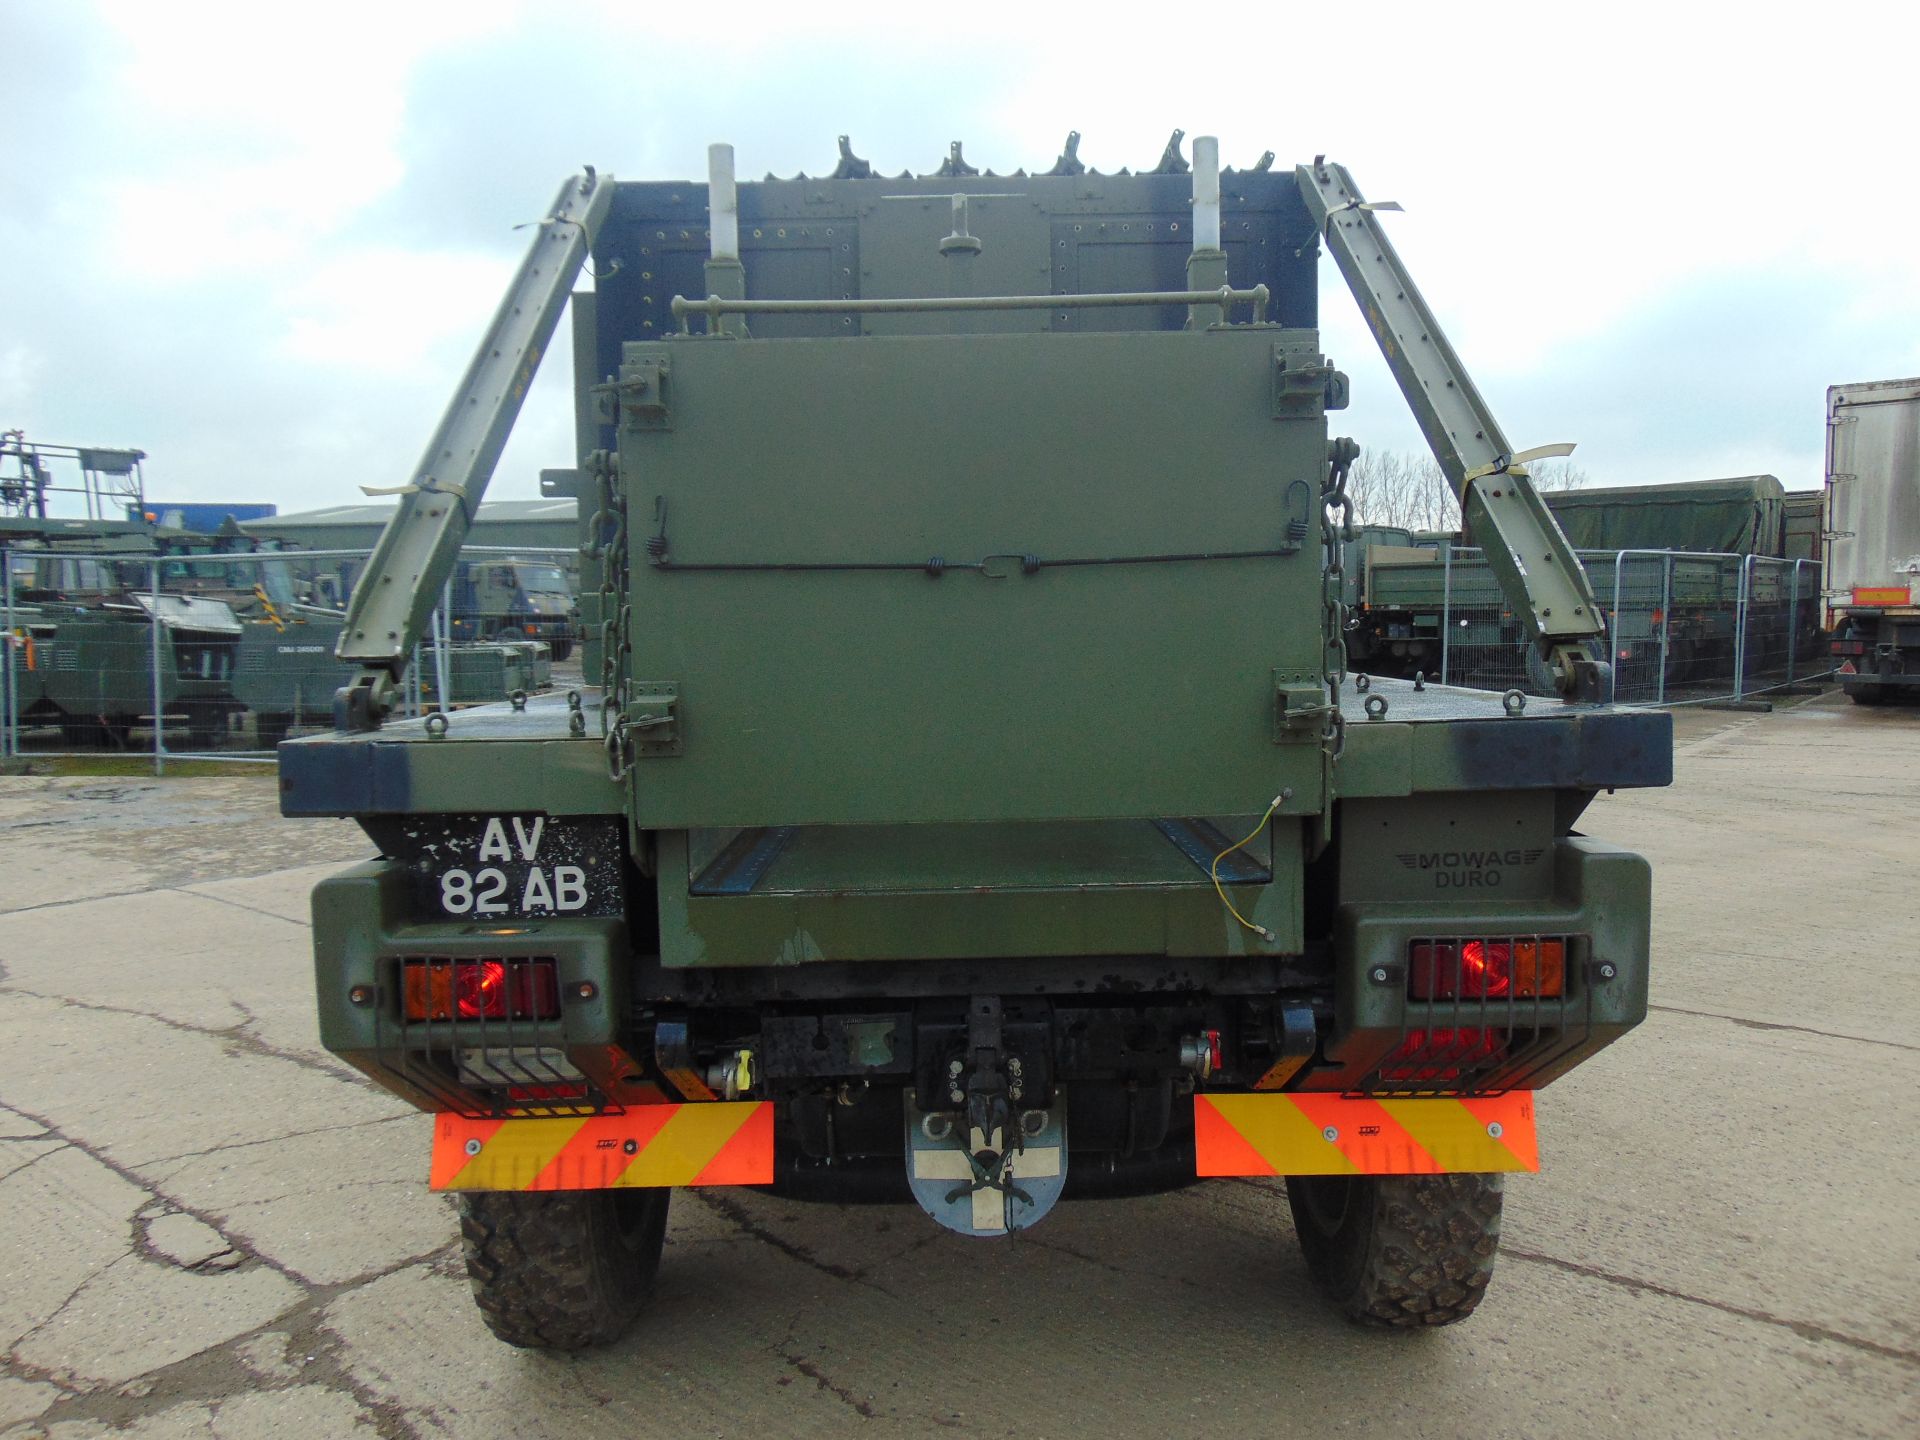 Ex Reserve Left Hand Drive Mowag Bucher Duro II 6x6 High-Mobility Tactical Vehicle - Image 3 of 15